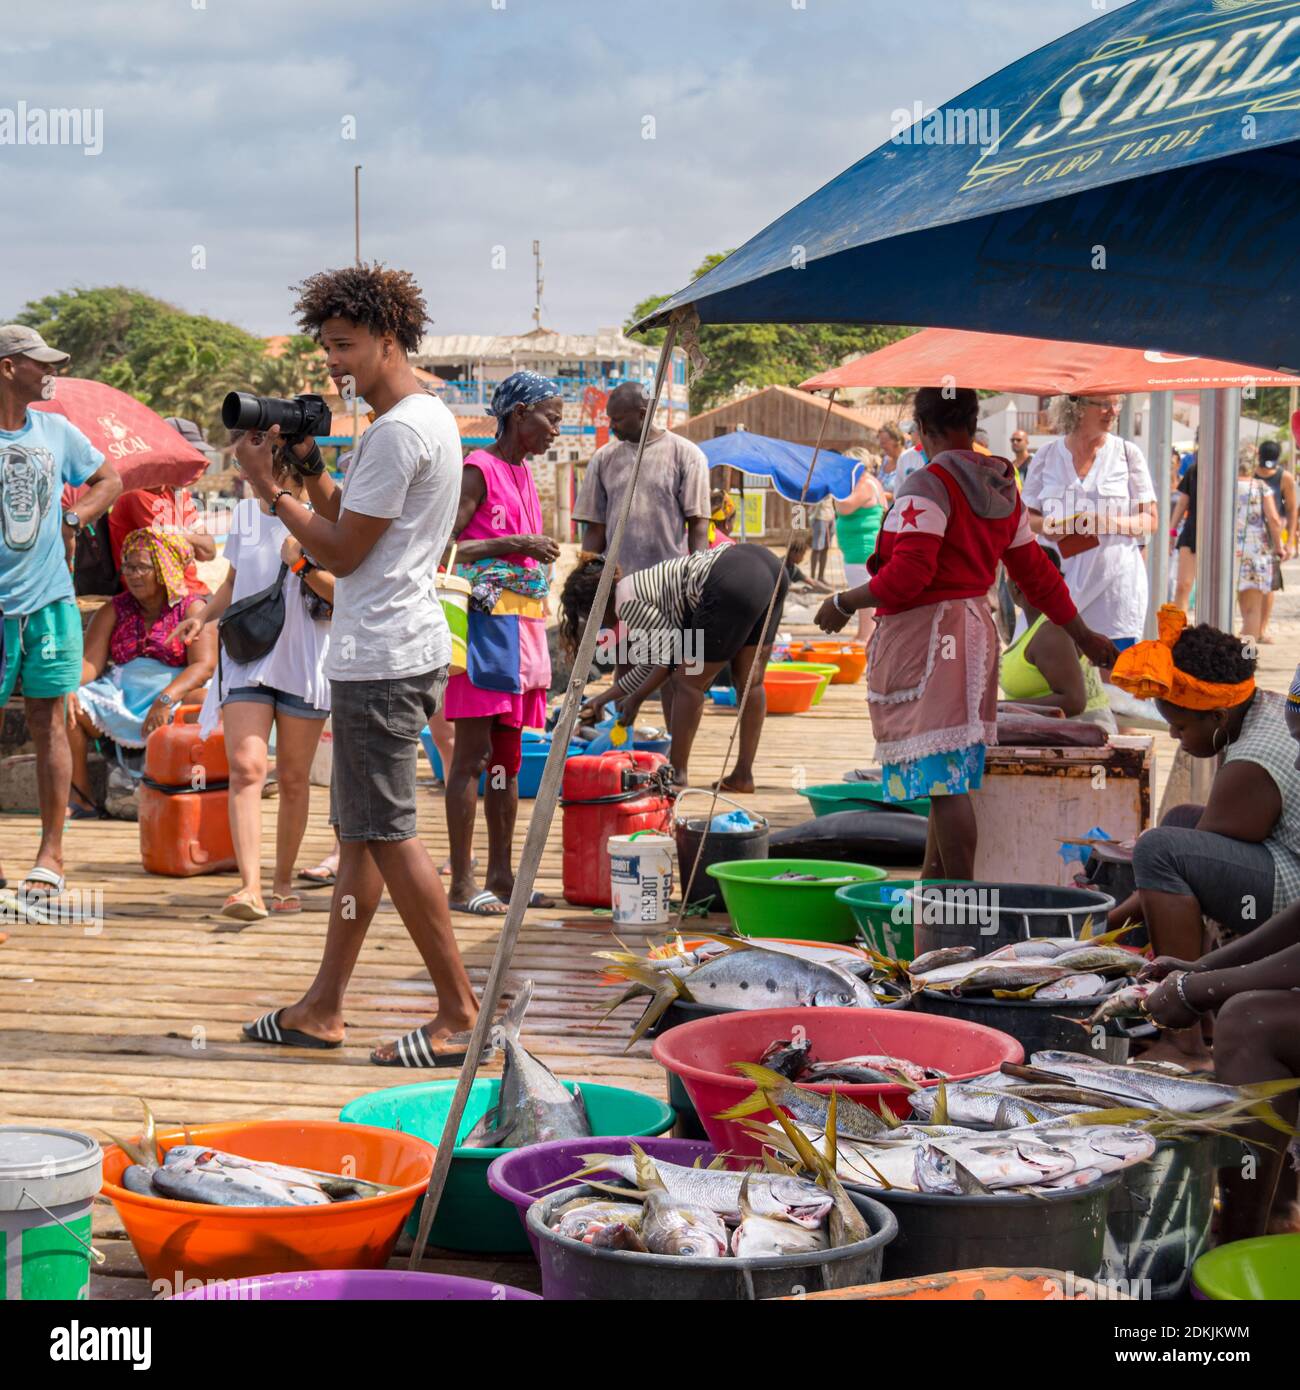 Cabo verde or Cape Verde or Green Cape Santa Maria pontoon wet market from local Fishers with man taking photos Stock Photo